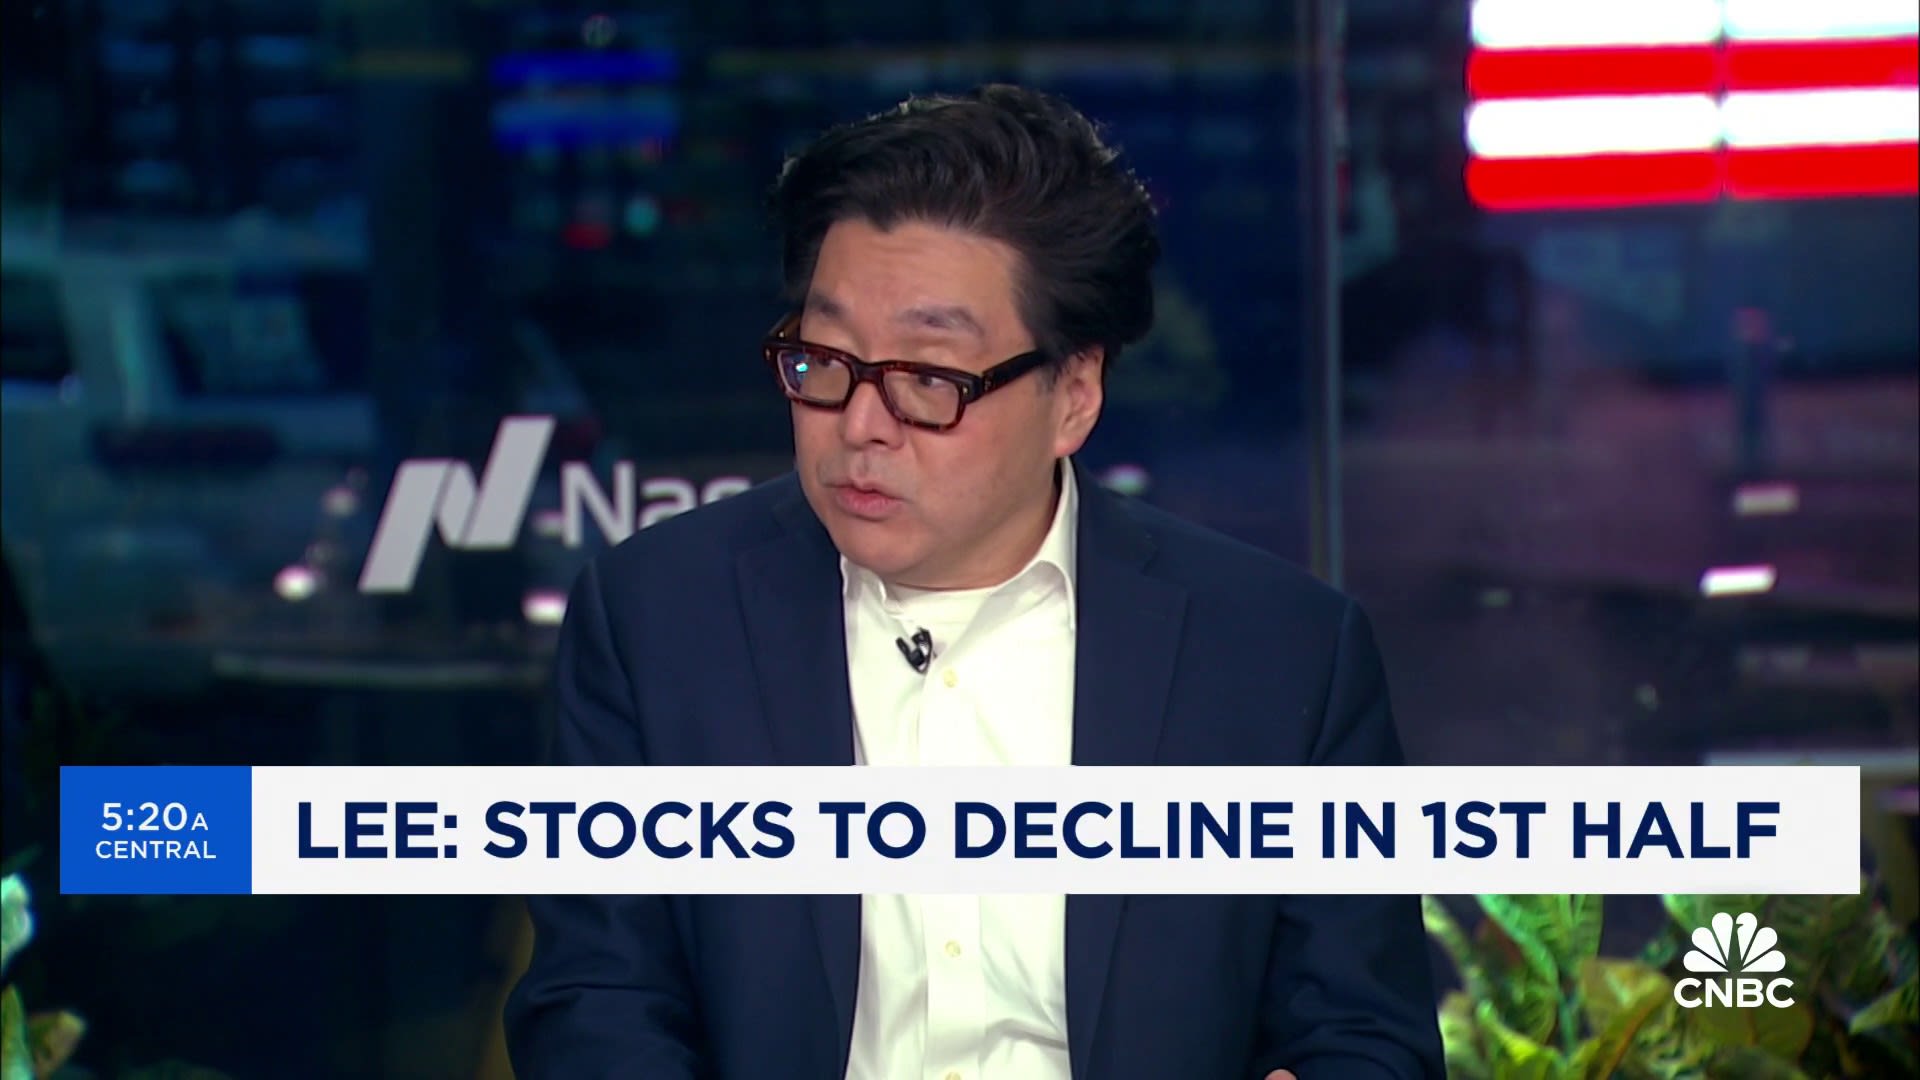 'Patient money' is the money that's been working the last few years, says Fundstrat's Tom Lee